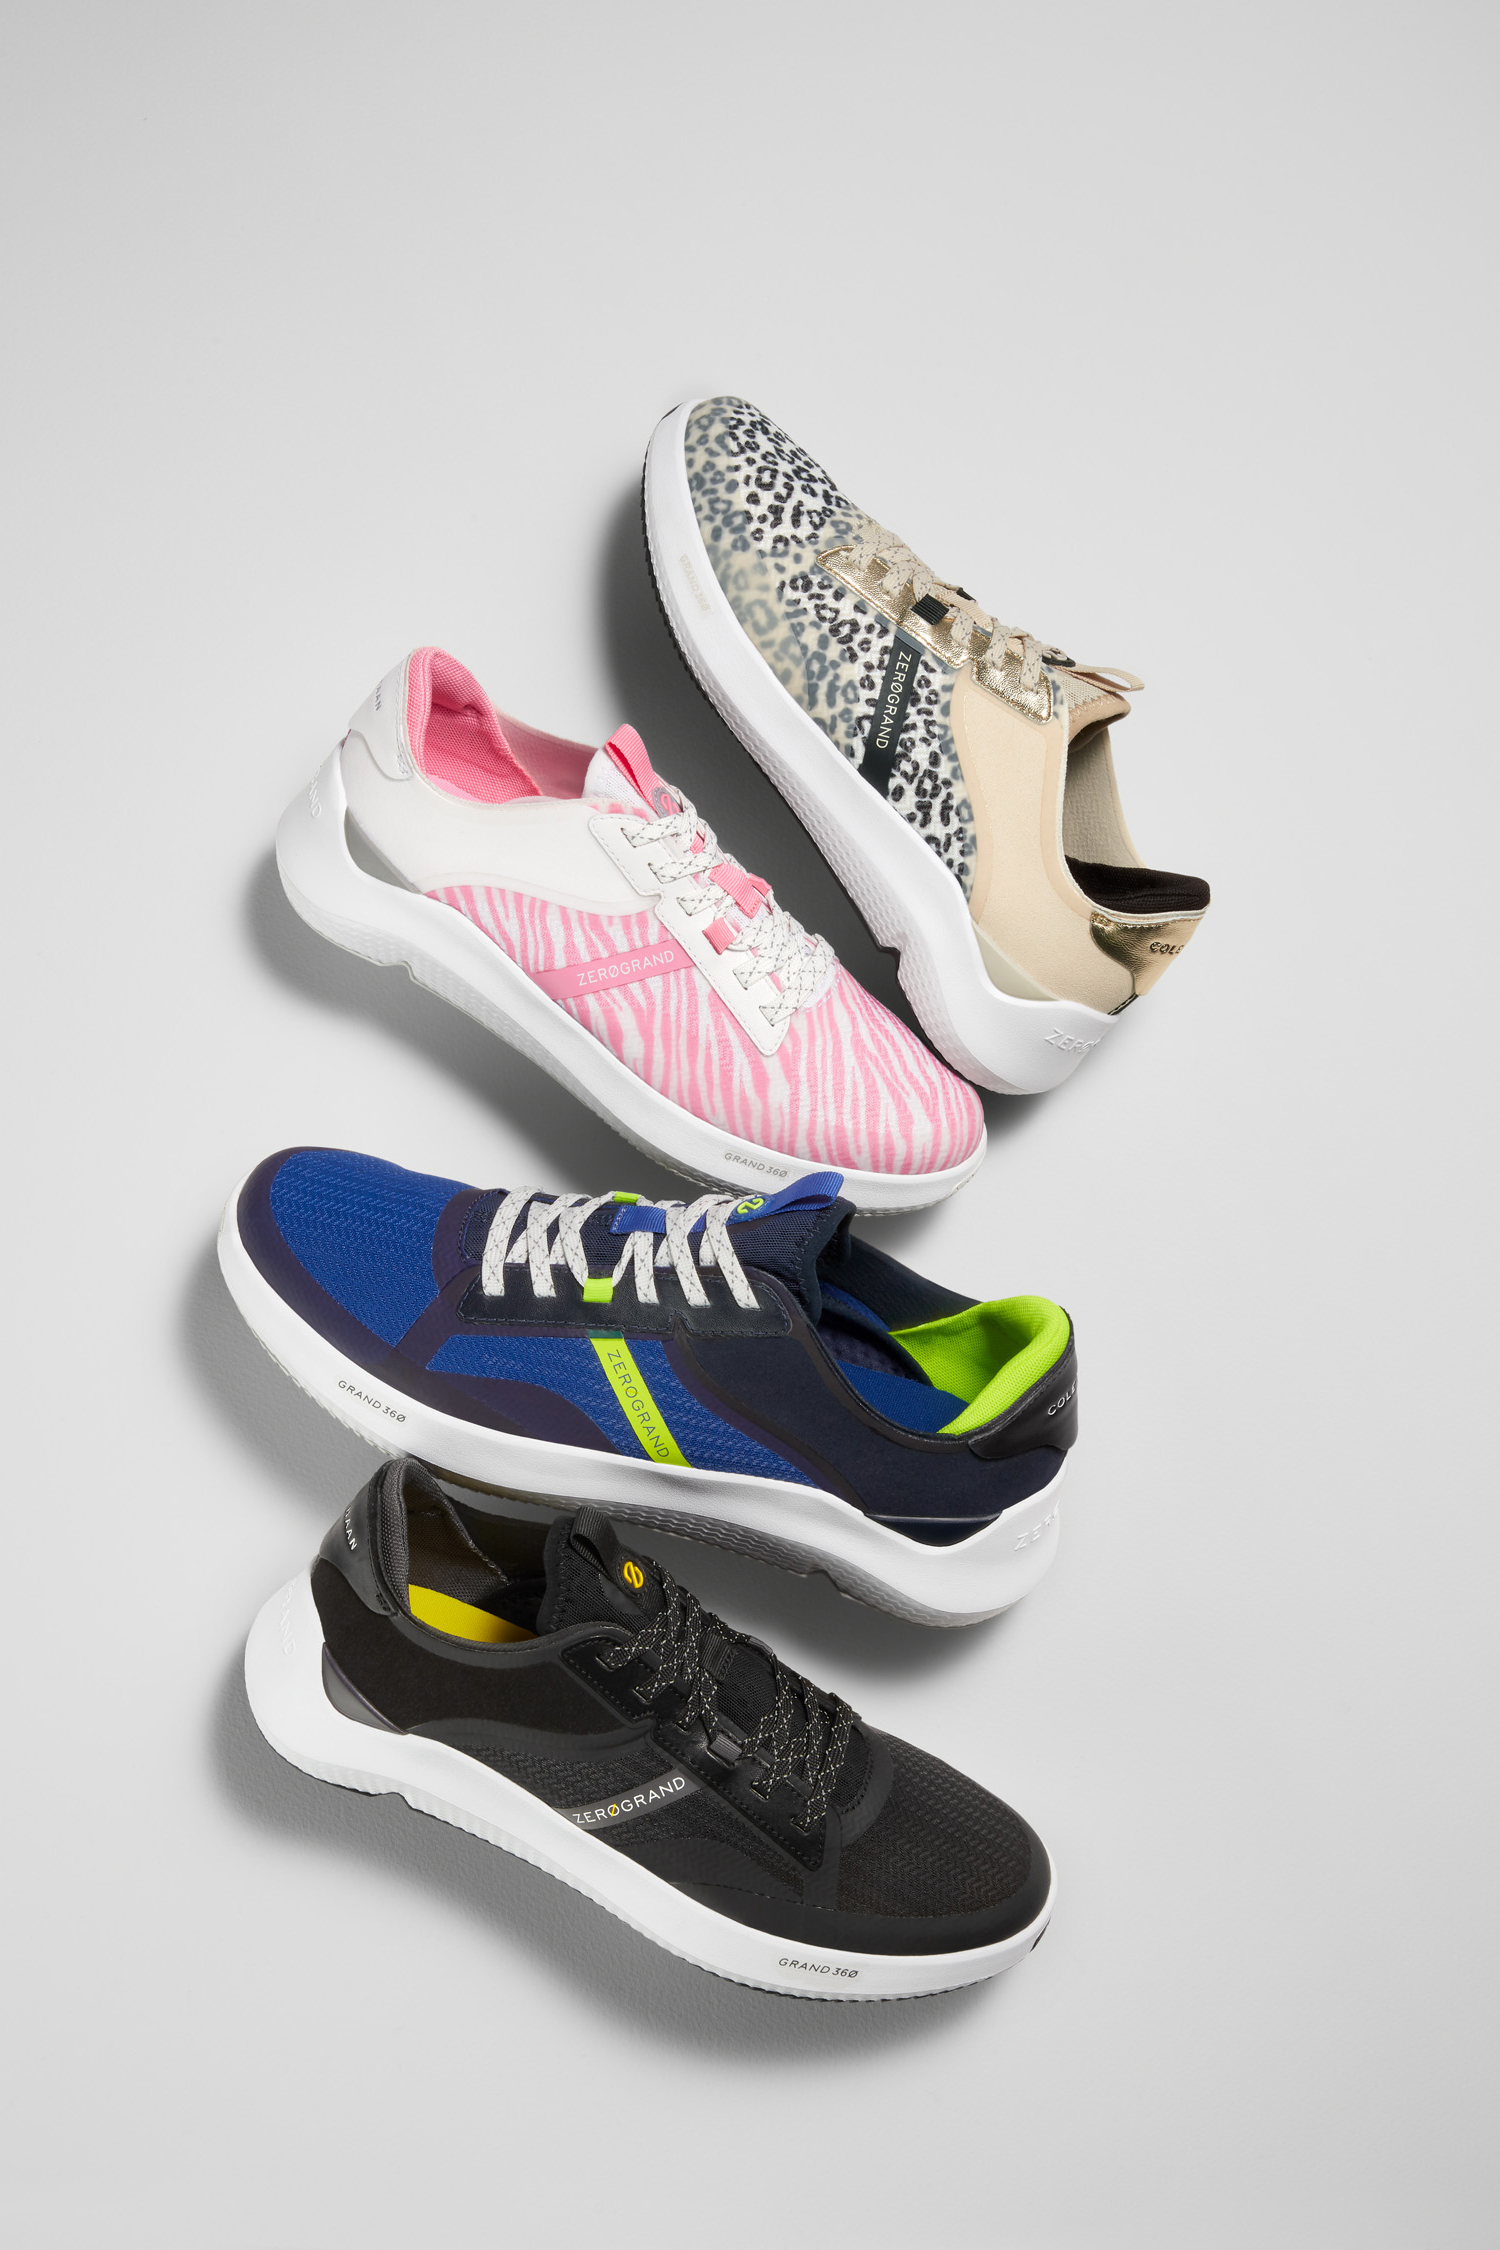 Cole Haan Introduces Performance Tennis